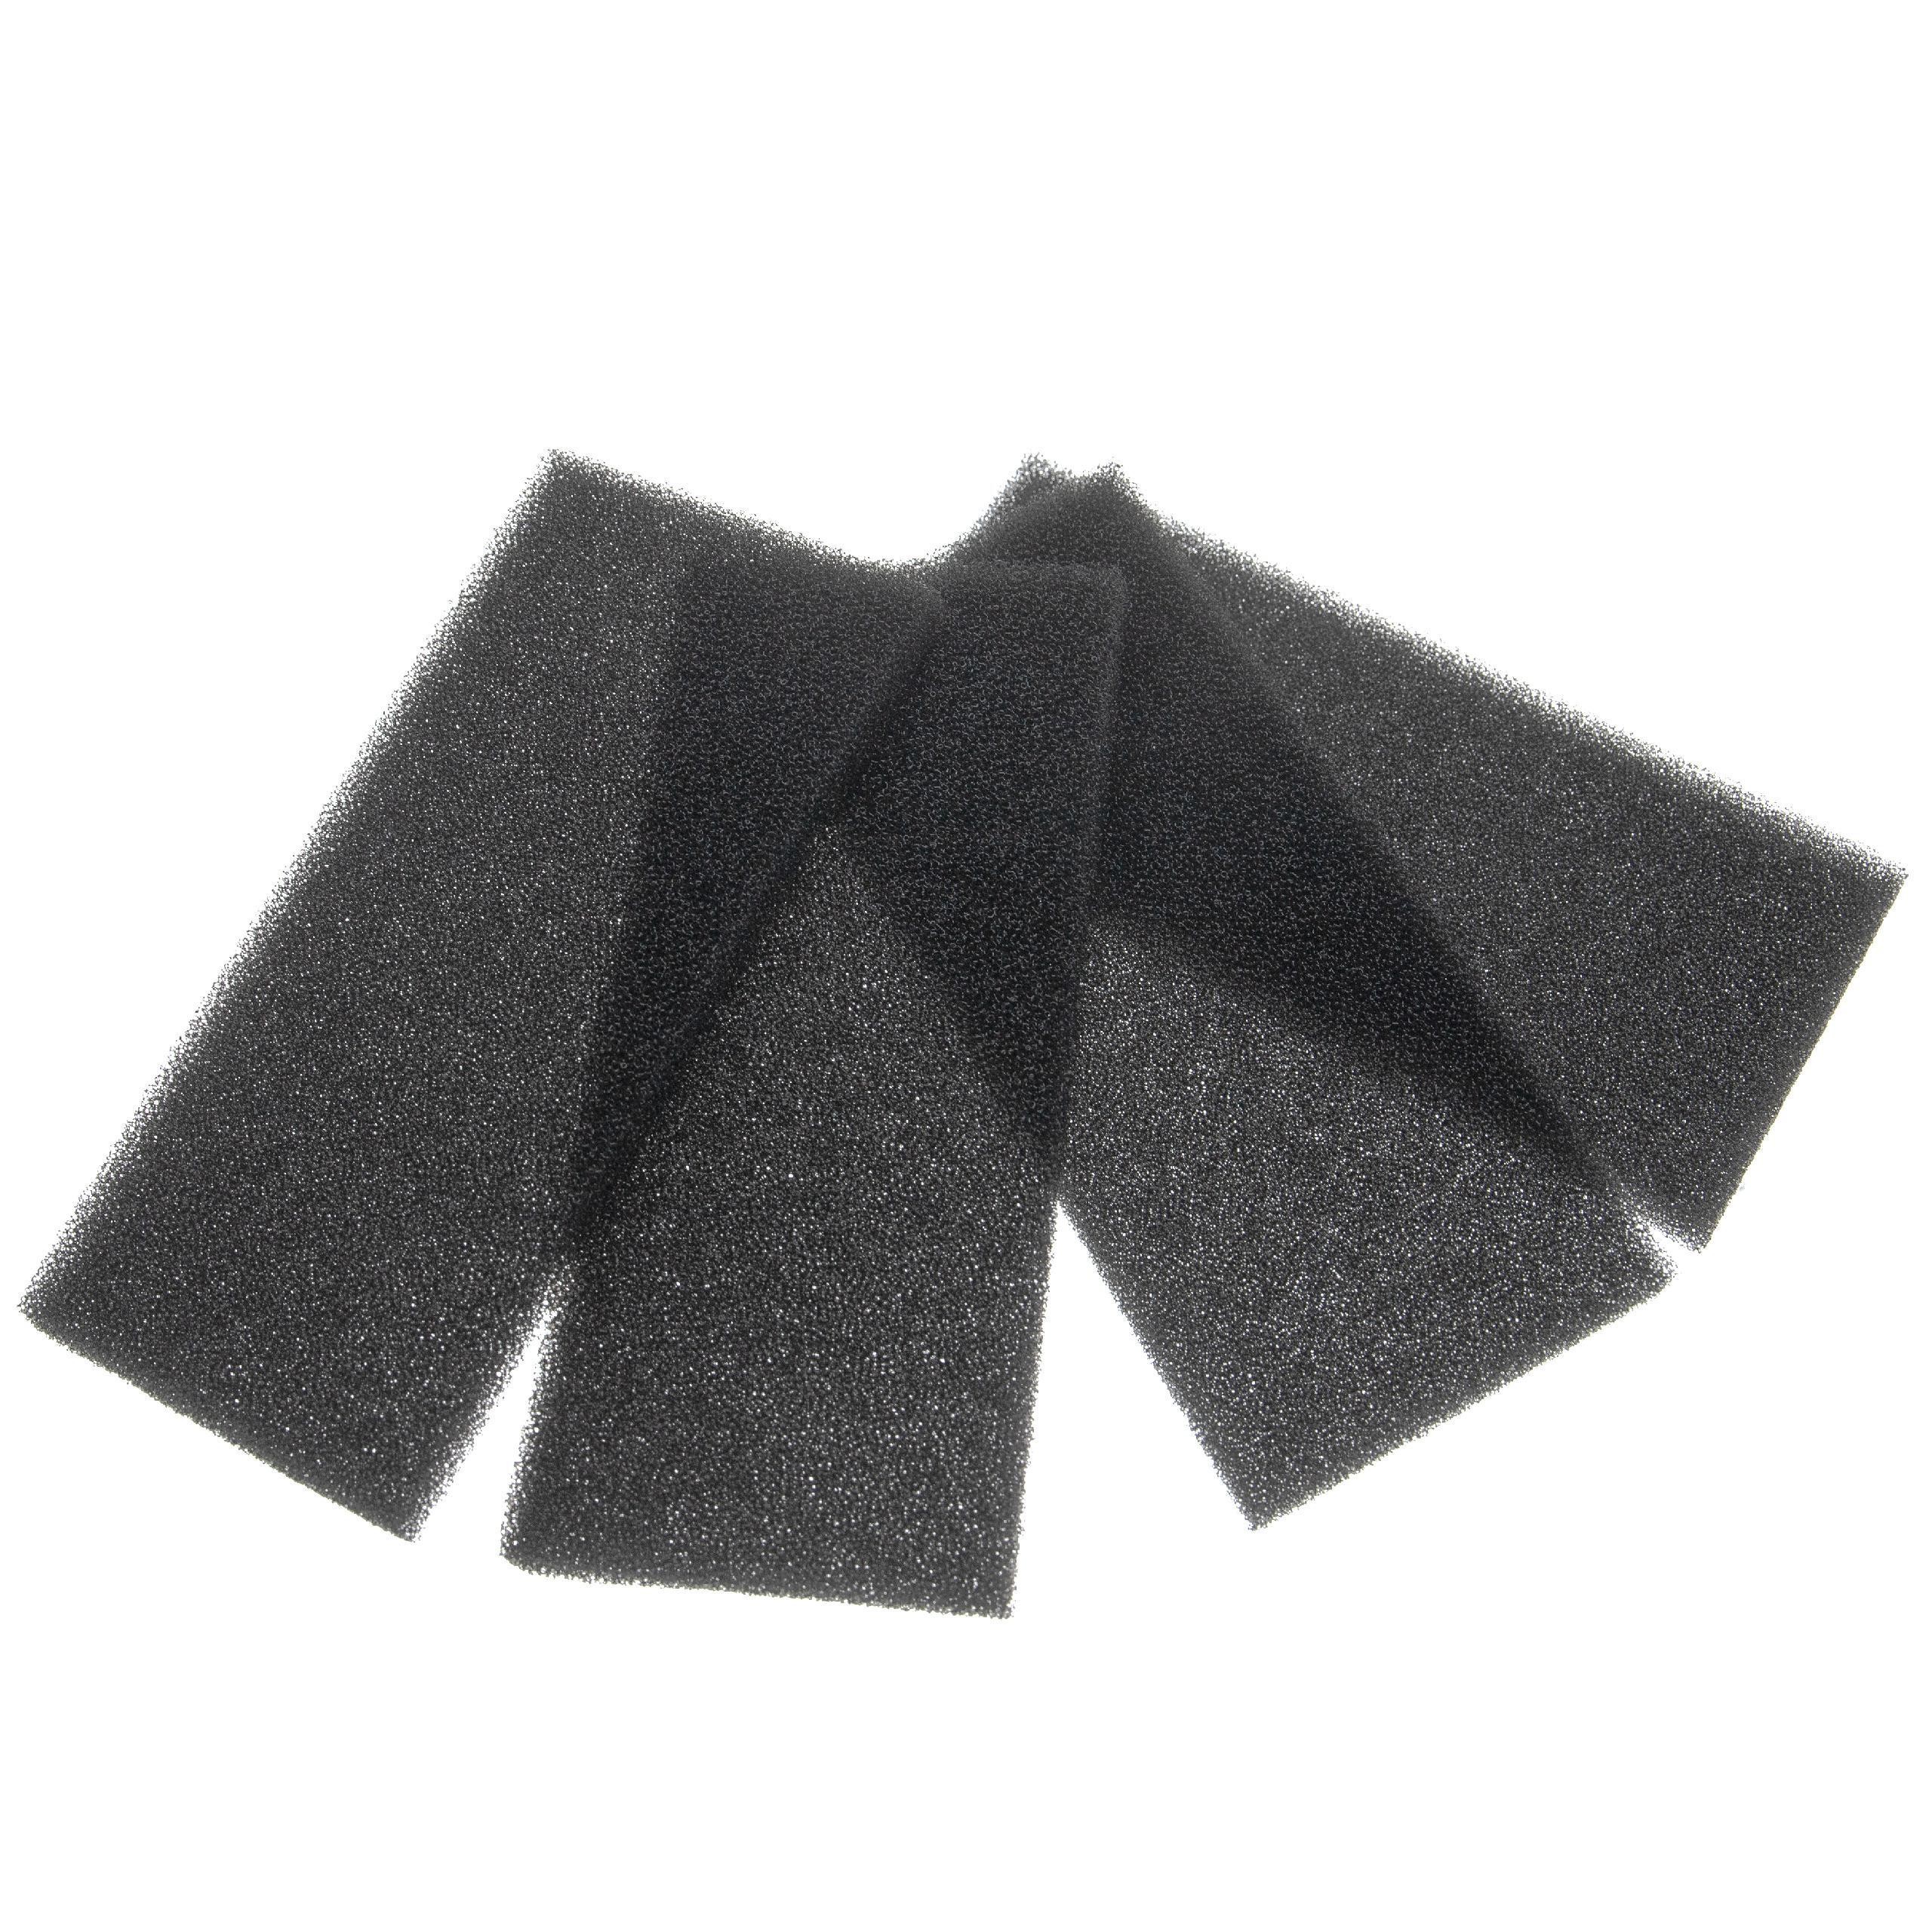 4x Filter G3 replaces Lunos 039998, 9/FEGO-3R, 039 998 for Lunos Air Ventilation Device - Coarse Dust Filters